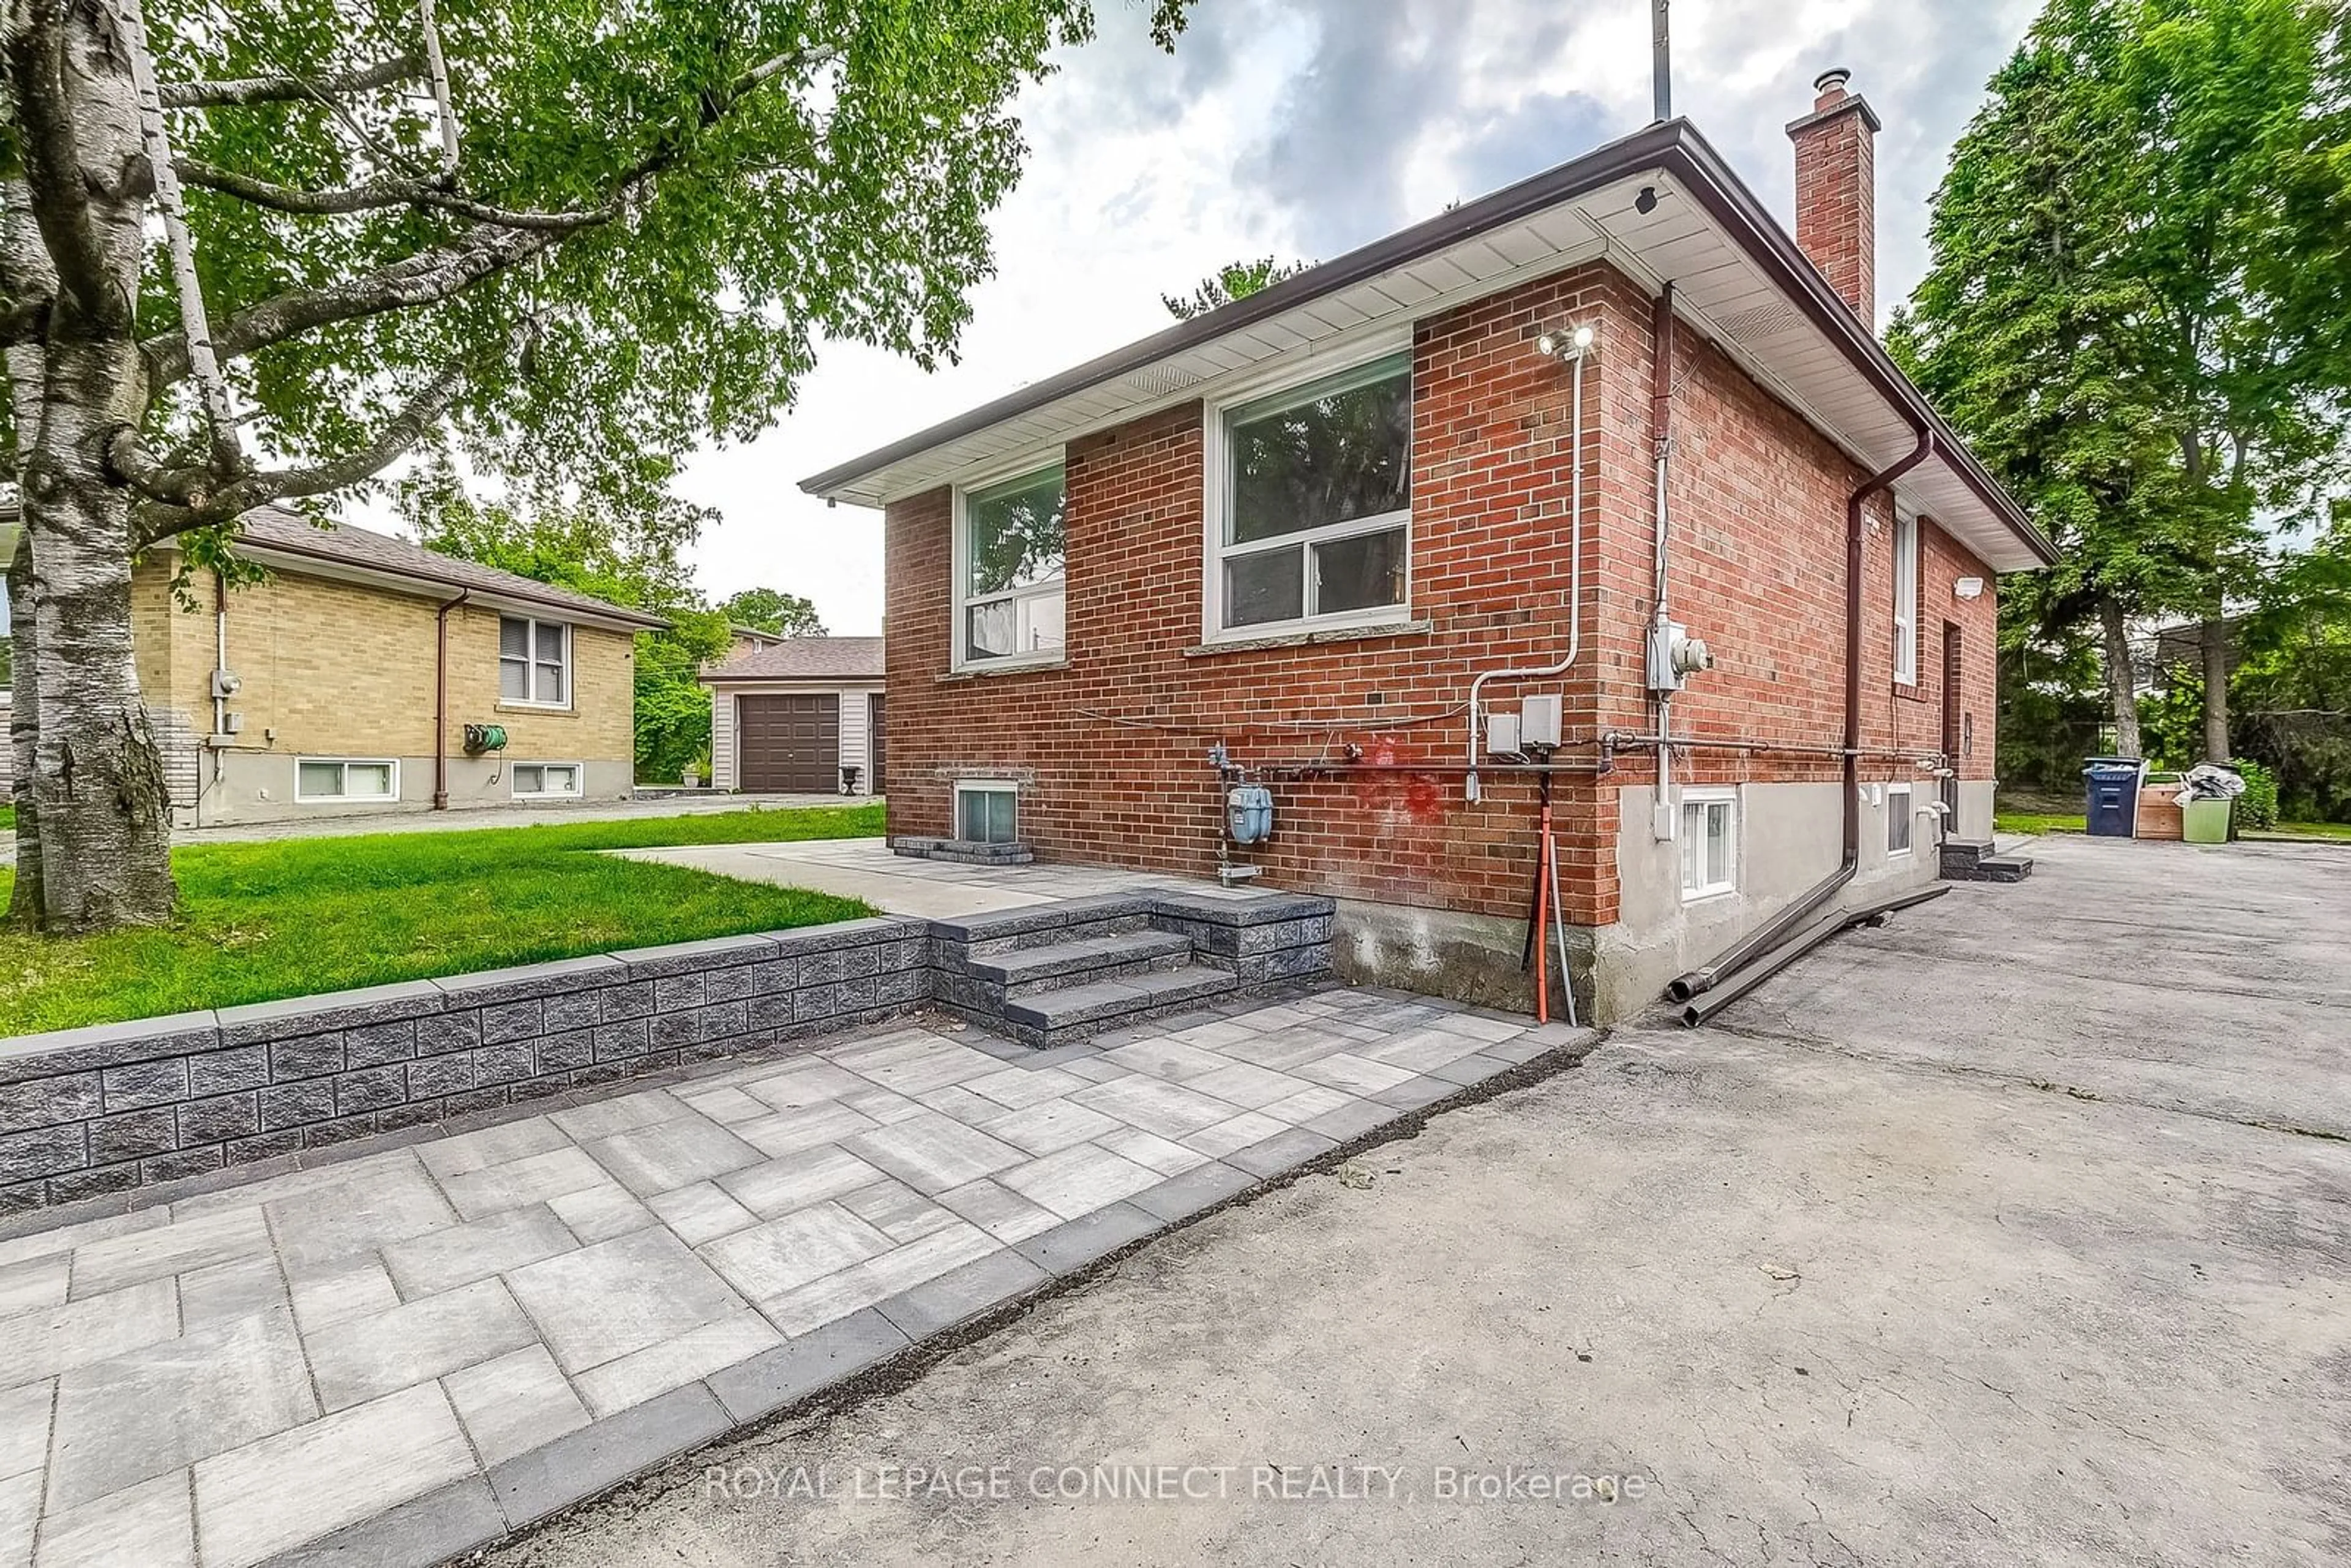 Home with brick exterior material for 44 Ronway Cres, Toronto Ontario M1J 2S2